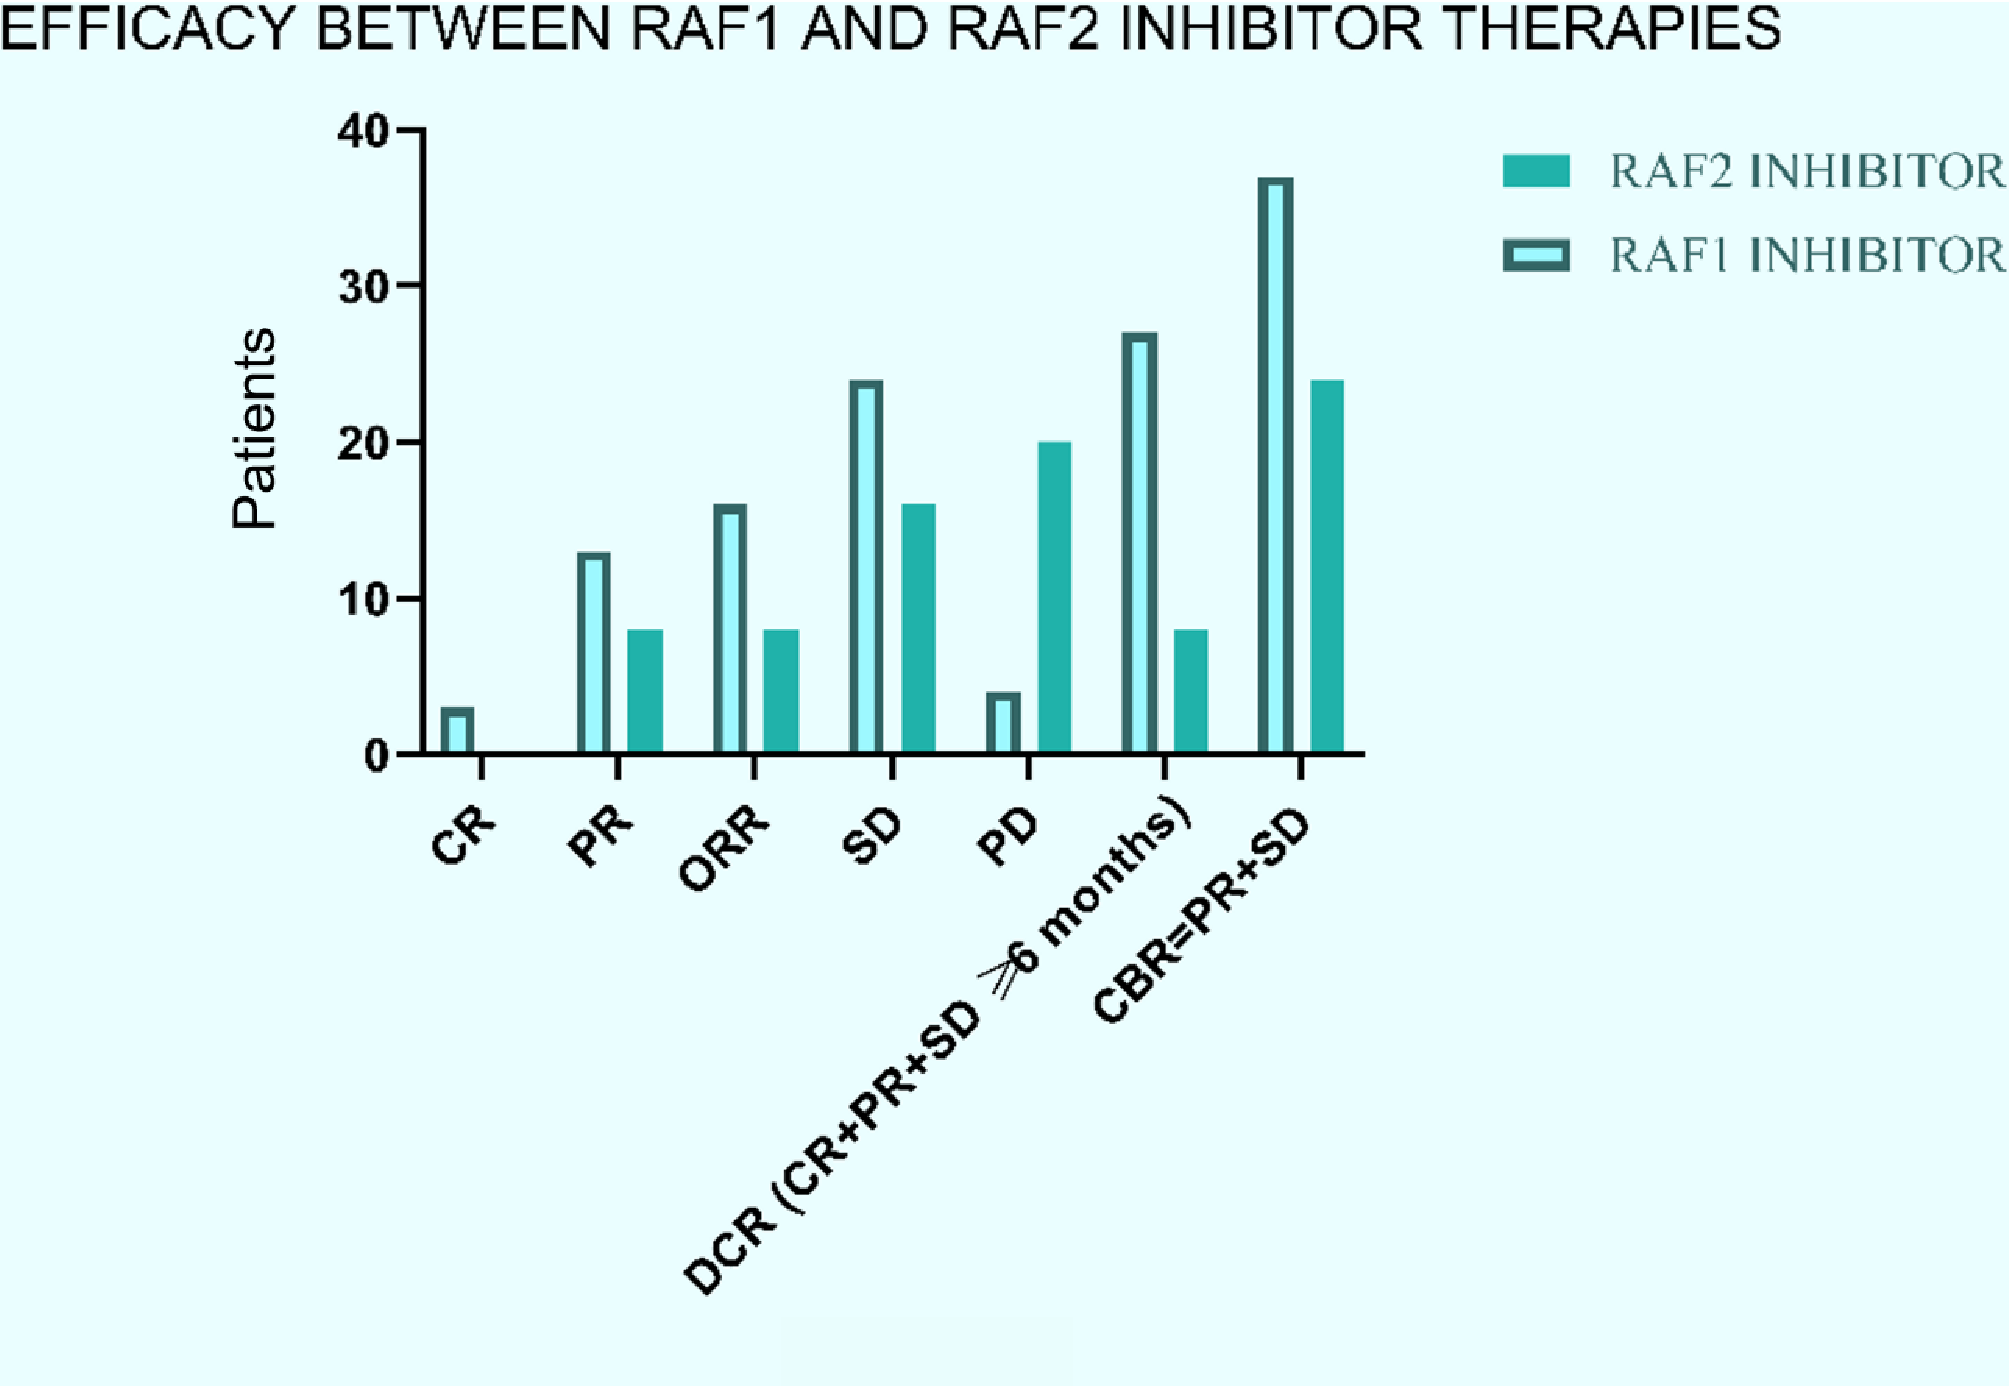 RAF inhibitor re-challenge therapy in BRAF-aberrant pan-cancers: the RE-RAFFLE study